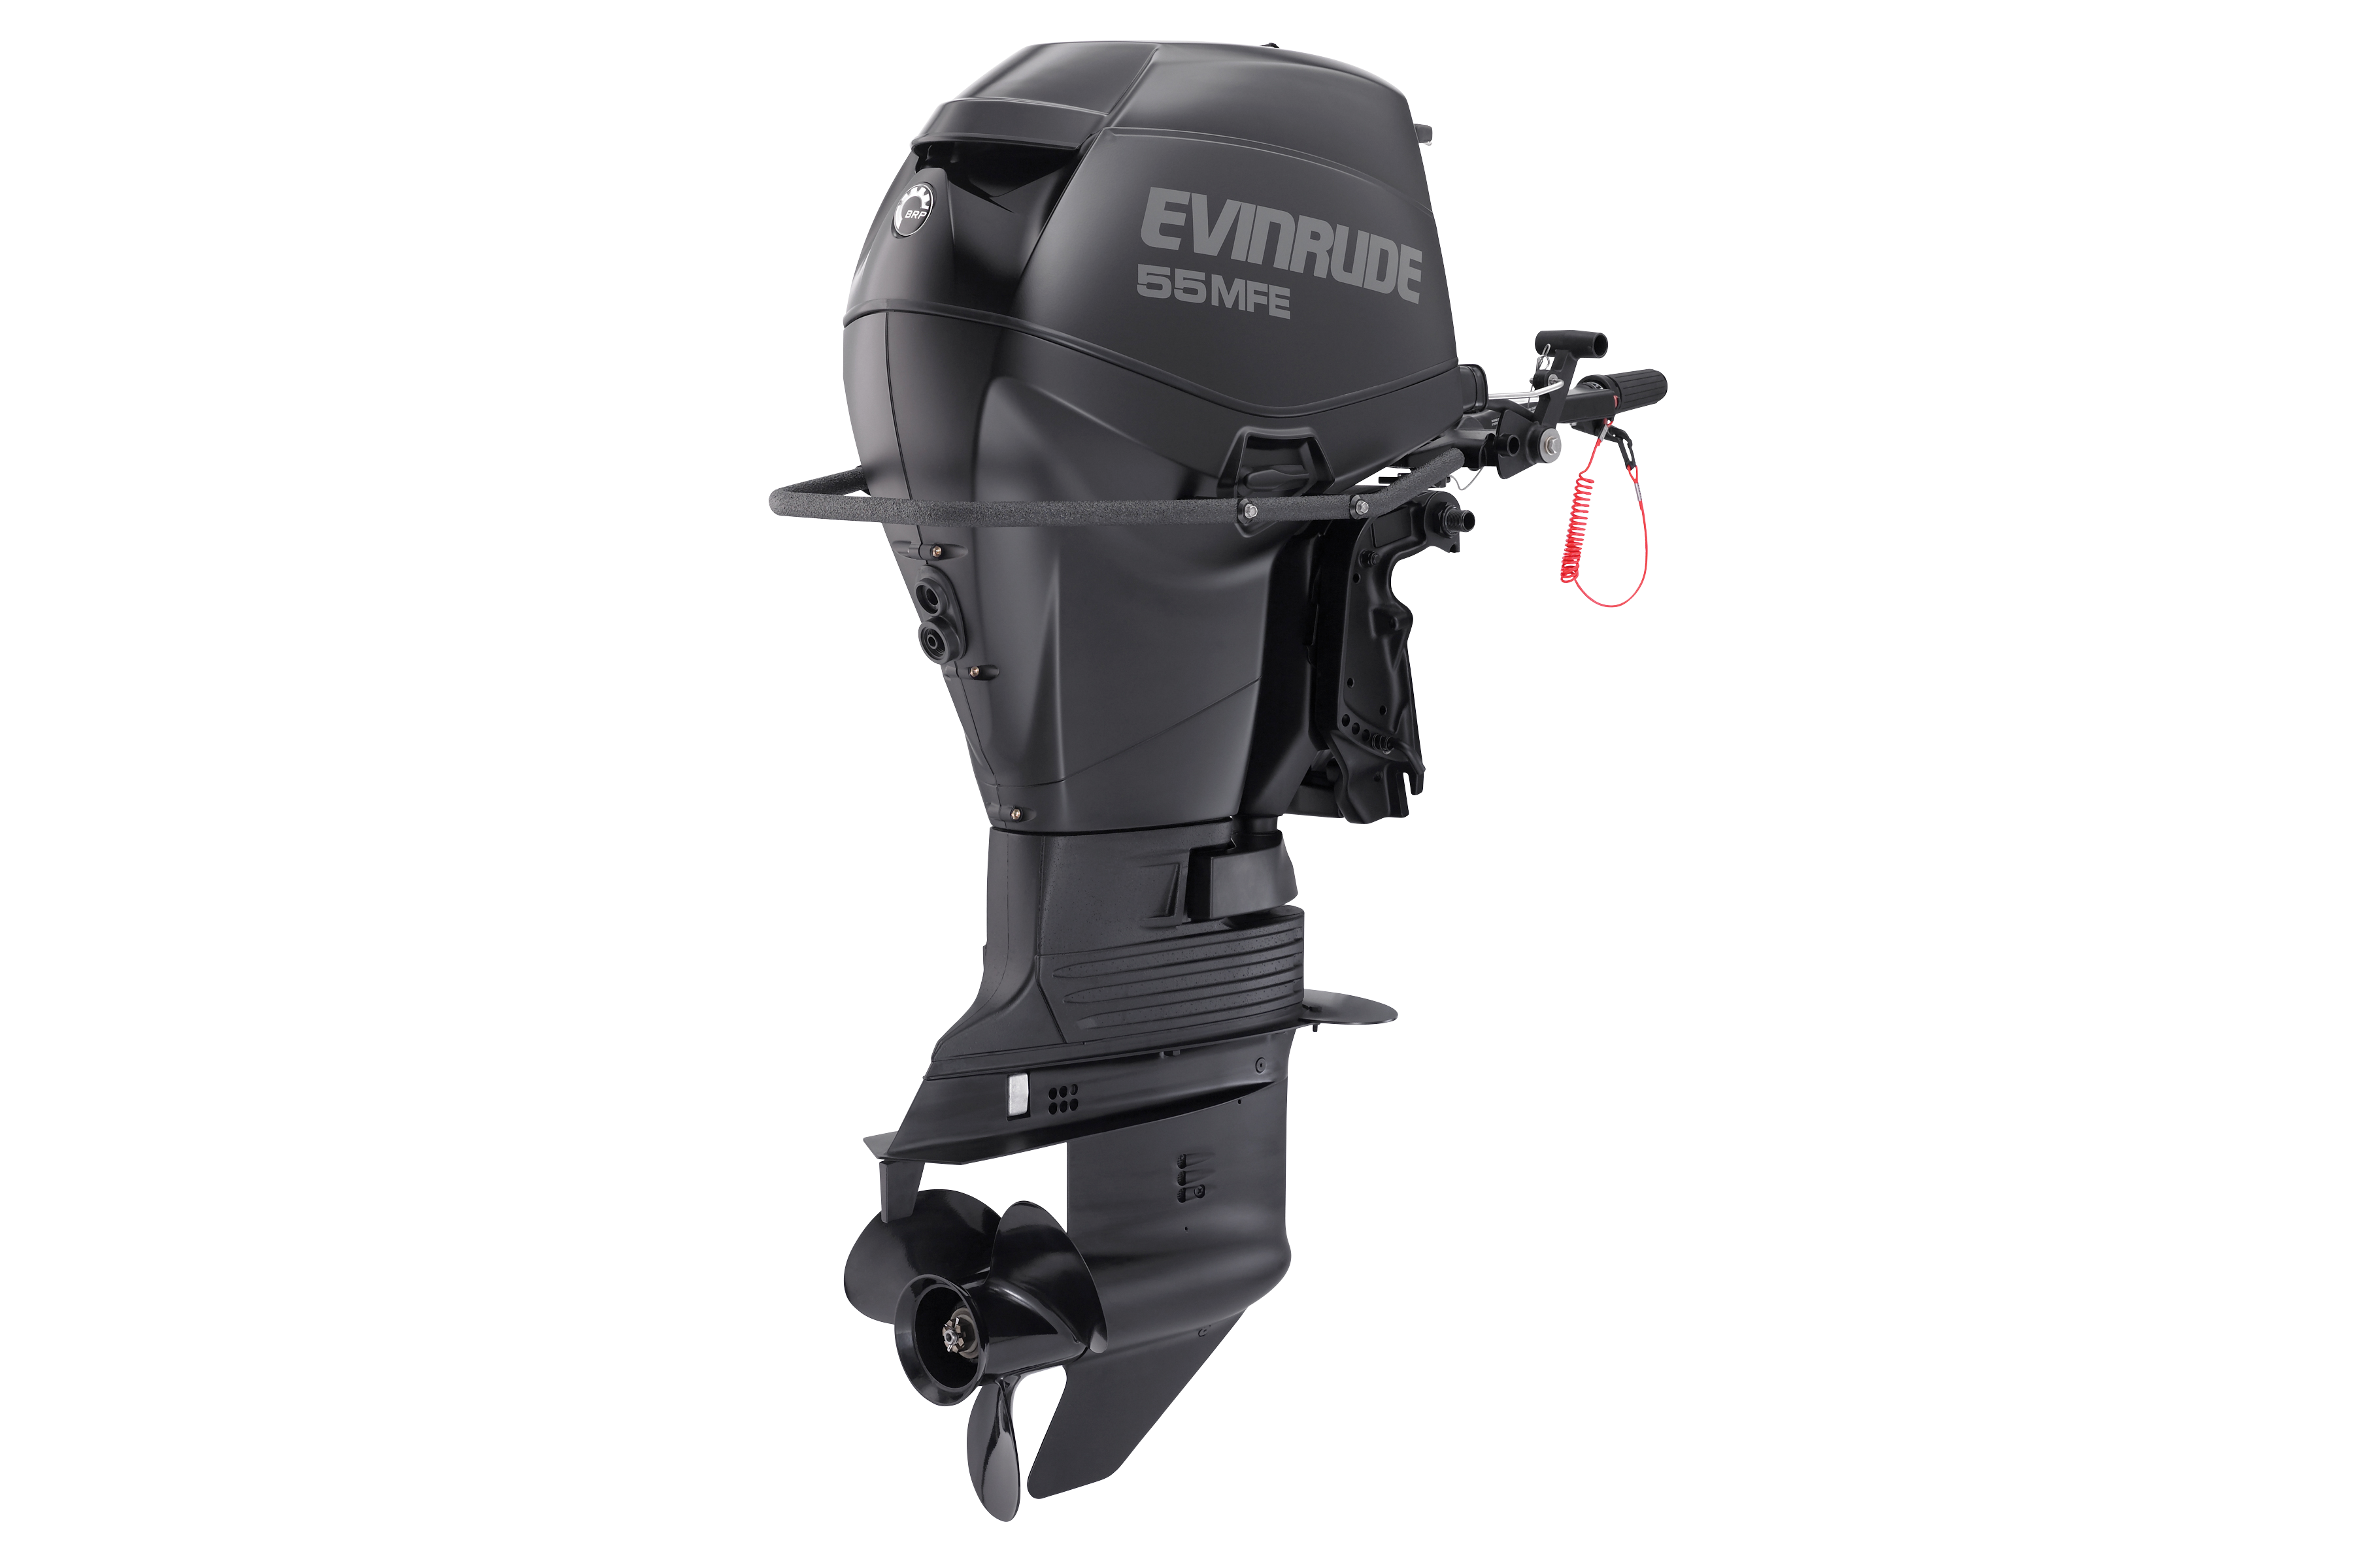 55 Hp Boat Motor by Evinrude